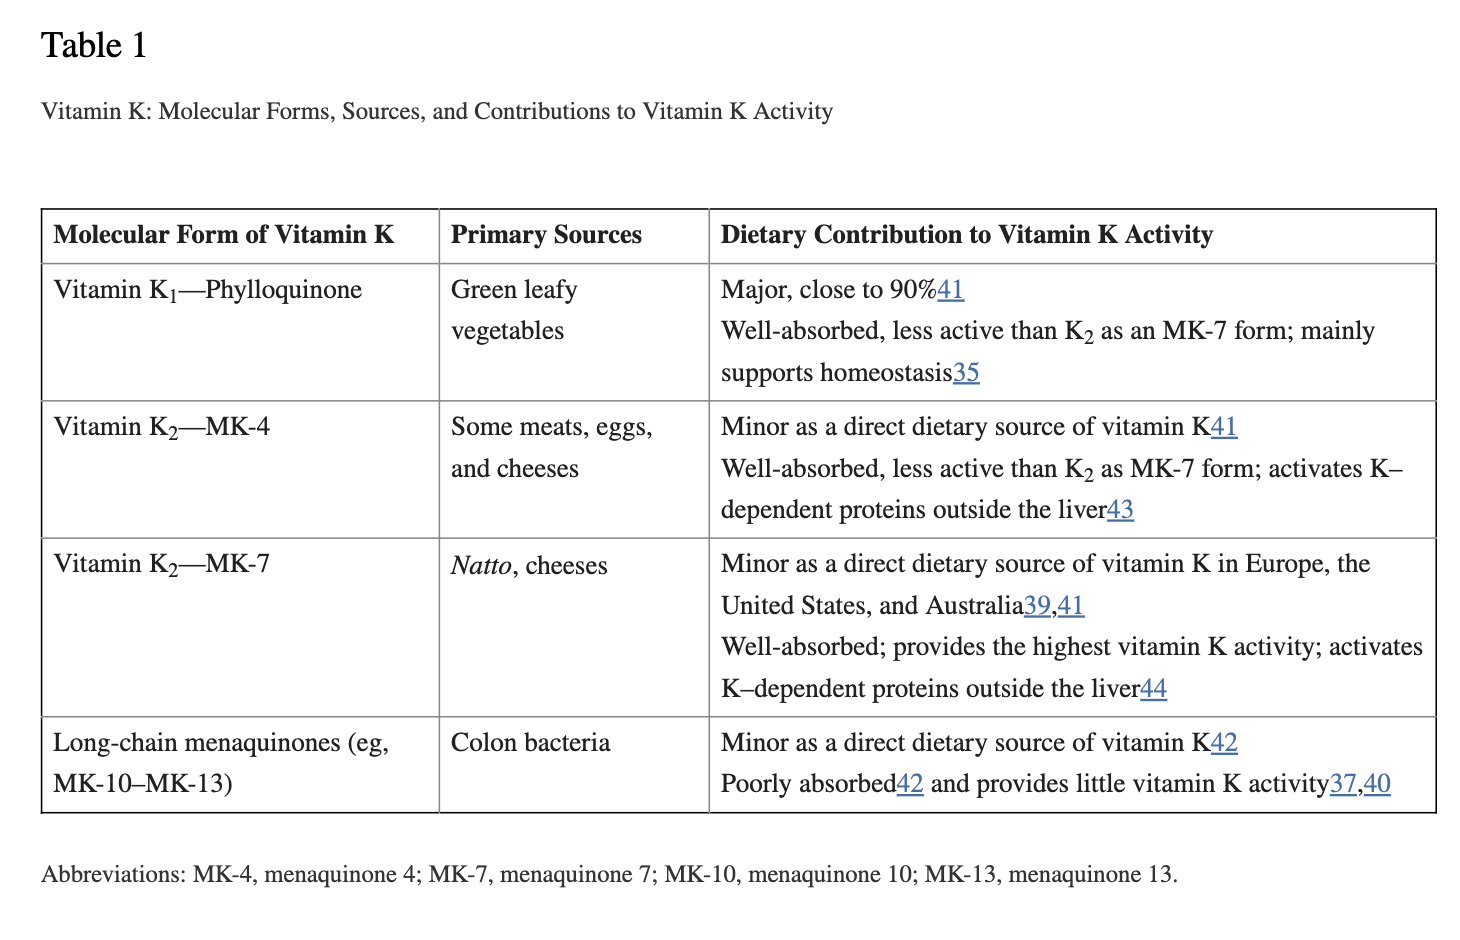 Different types of vitamin K